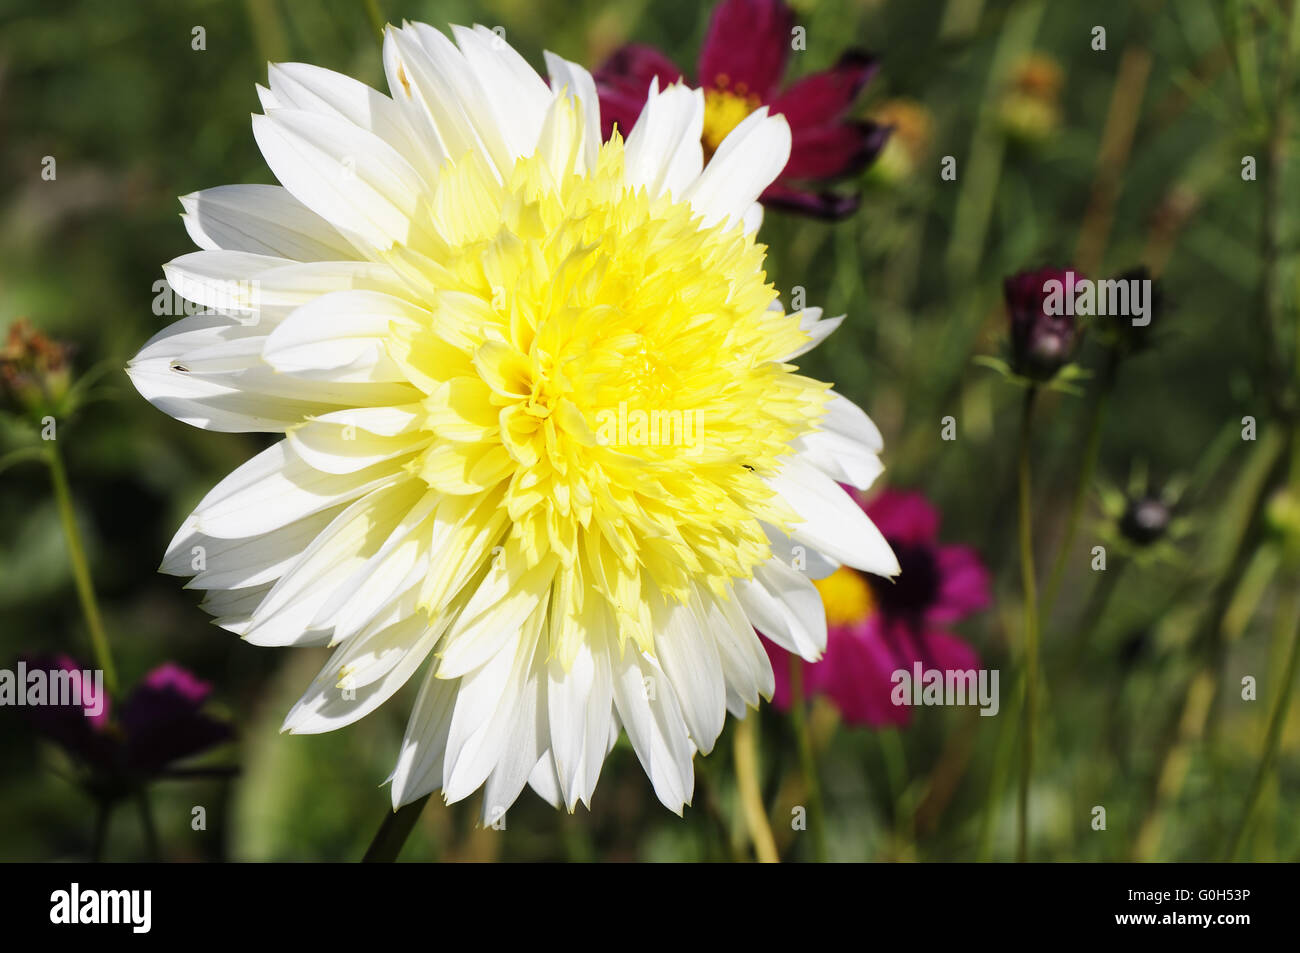 White with yellow blossoming Dahlia flowe over blurry background Stock Photo